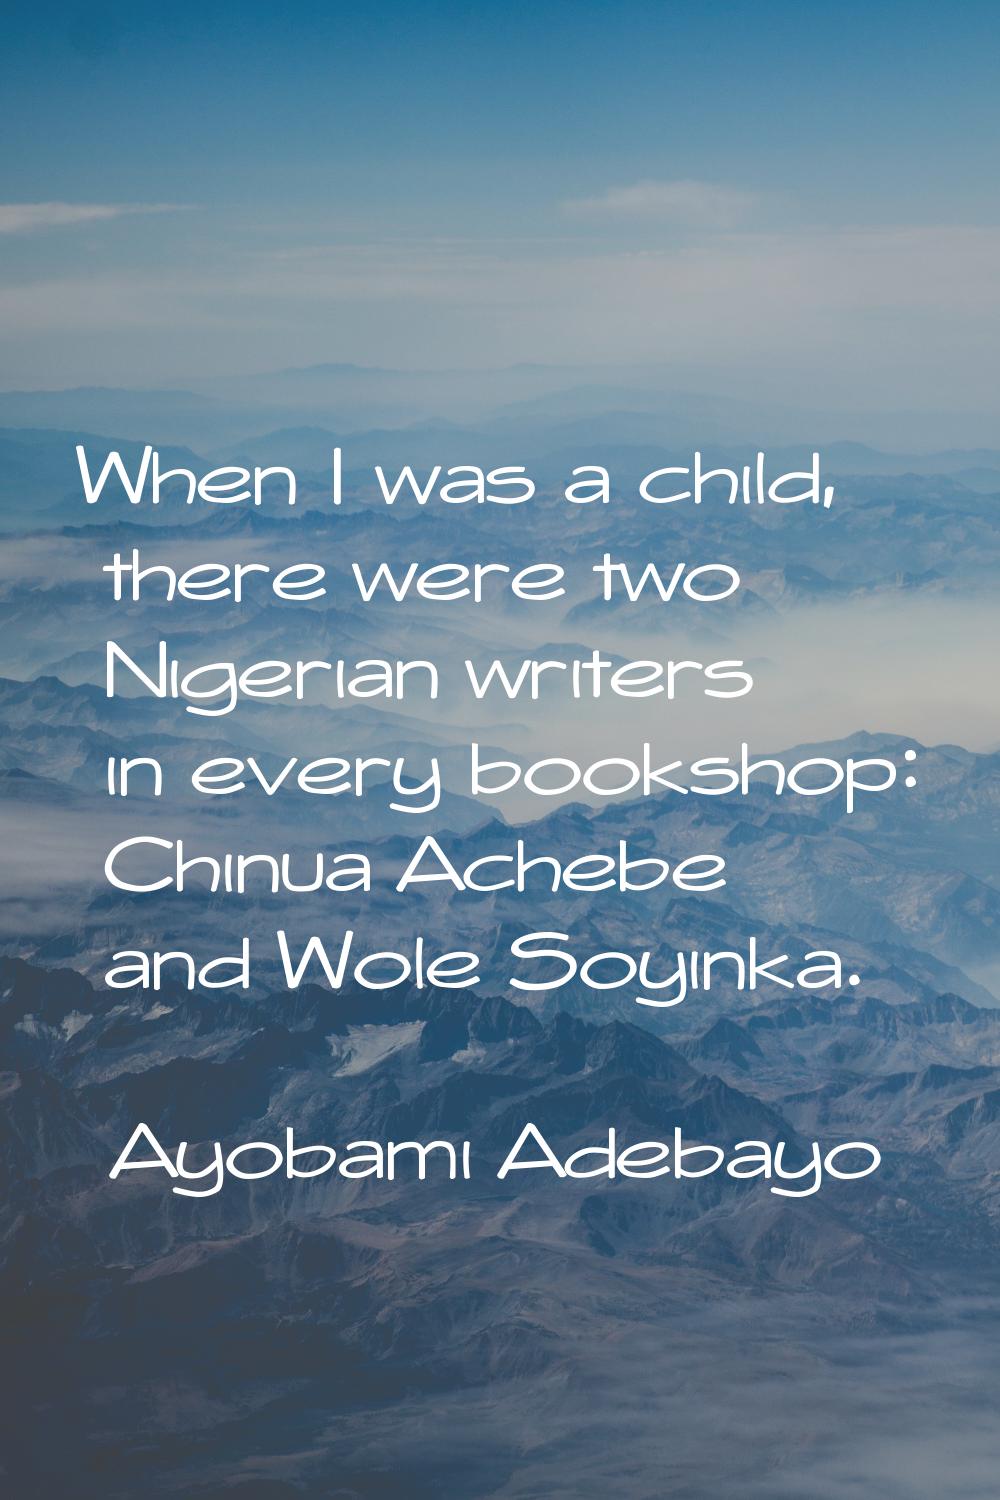 When I was a child, there were two Nigerian writers in every bookshop: Chinua Achebe and Wole Soyin